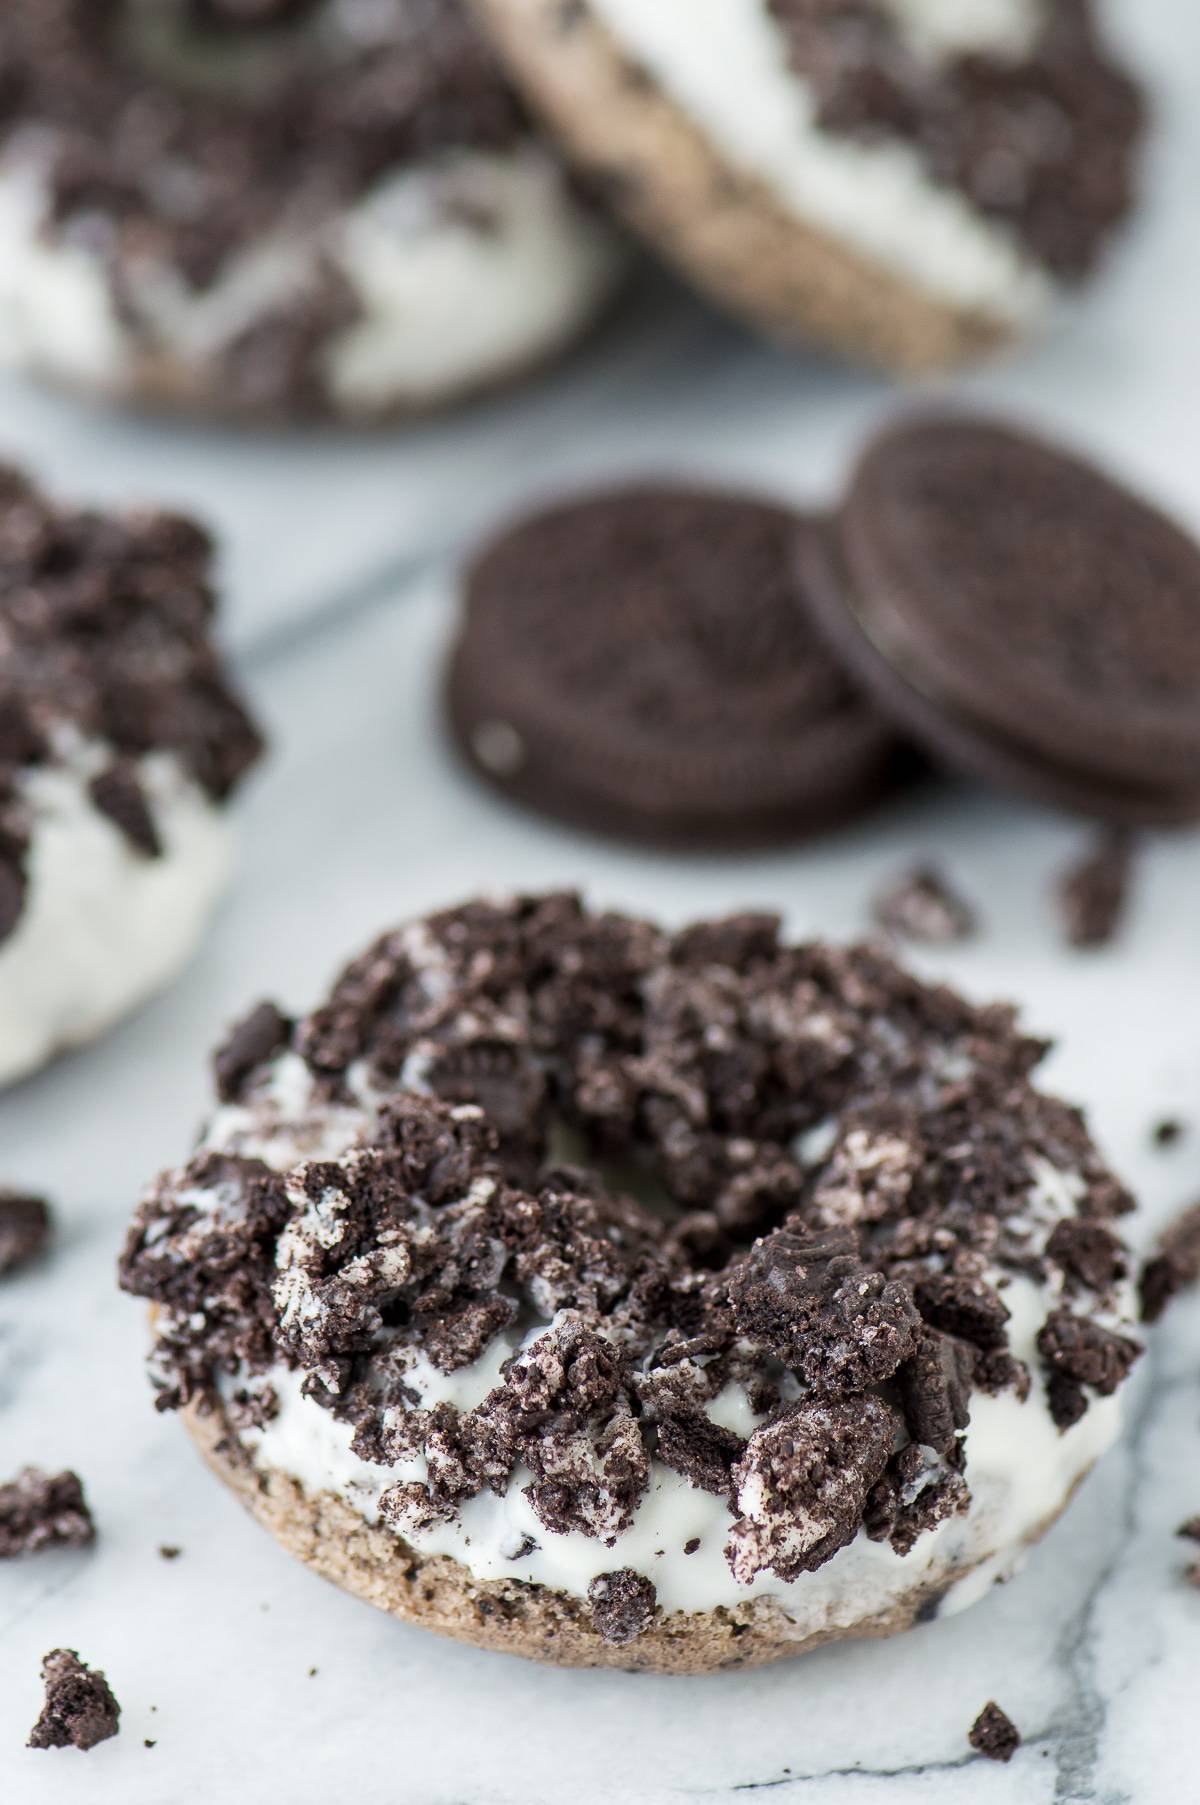 The BEST oreo donut! Oreos in the batter and crushed Oreos on top of the white chocolate - so delicious!